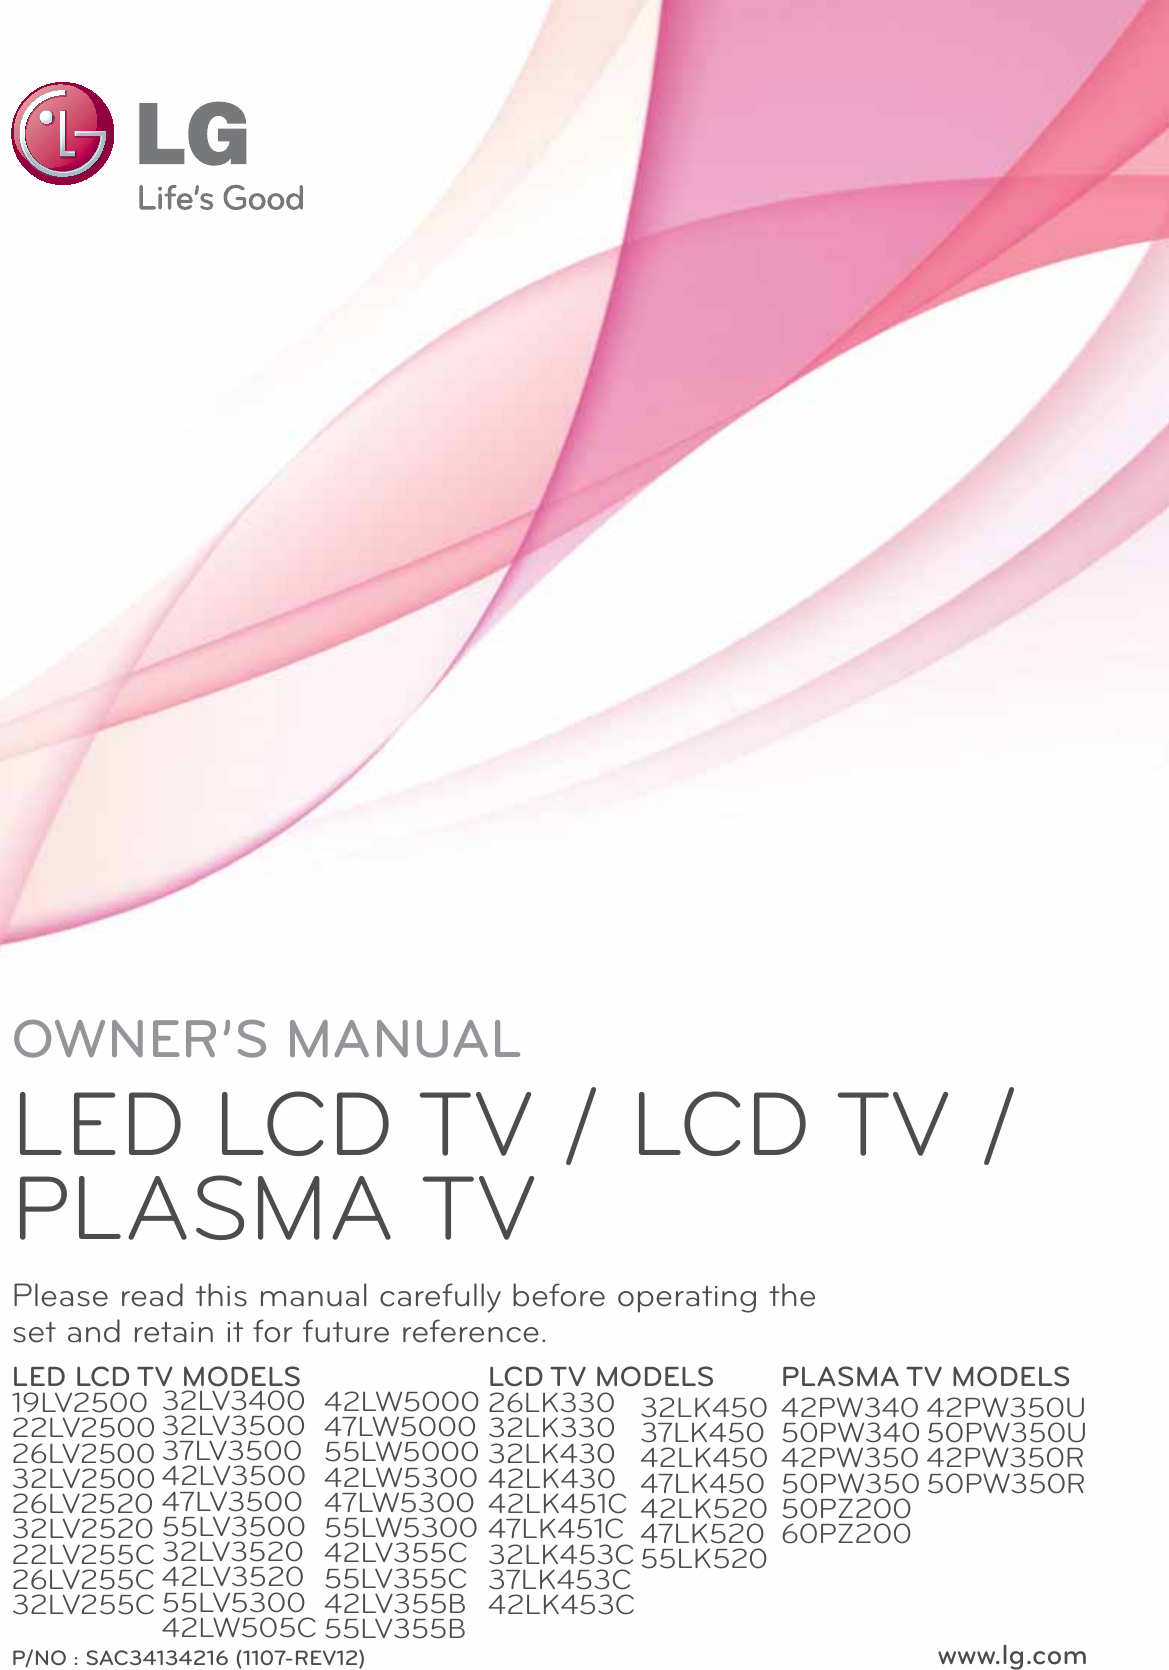 www.lg.comP/NO : SAC34134216 (1107-REV12)OWNER’S MANUALLED LCD TV / LCD TV / PLASMA TVPlease read this manual carefully before operating the set and retain it for future reference.LED LCD TV MODELS19LV250022LV250026LV250032LV250026LV252032LV252022LV255C26LV255C32LV255CLCD TV MODELS26LK33032LK33032LK43042LK43042LK451C47LK451C32LK453C37LK453C42LK453CPLASMA TV MODELS42PW34050PW34042PW35050PW35050PZ20060PZ20032LV340032LV350037LV350042LV350047LV350055LV350032LV352042LV352055LV530042LW505C32LK45037LK45042LK45047LK45042LK52047LK52055LK52042PW350U50PW350U42PW350R50PW350R42LW500047LW500055LW500042LW530047LW530055LW530042LV355C55LV355C42LV355B55LV355B